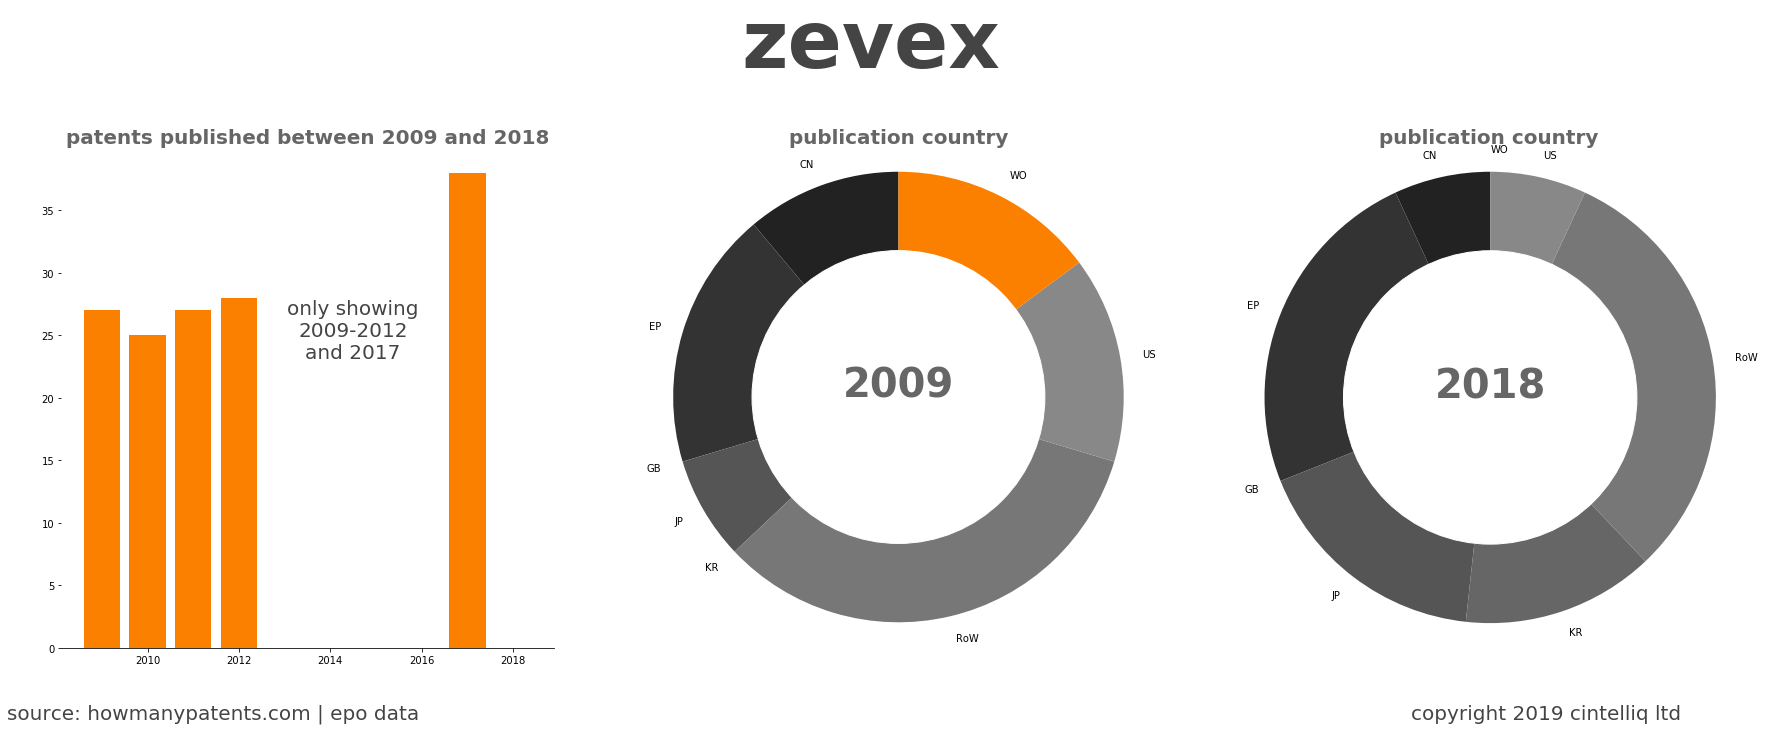 summary of patents for Zevex